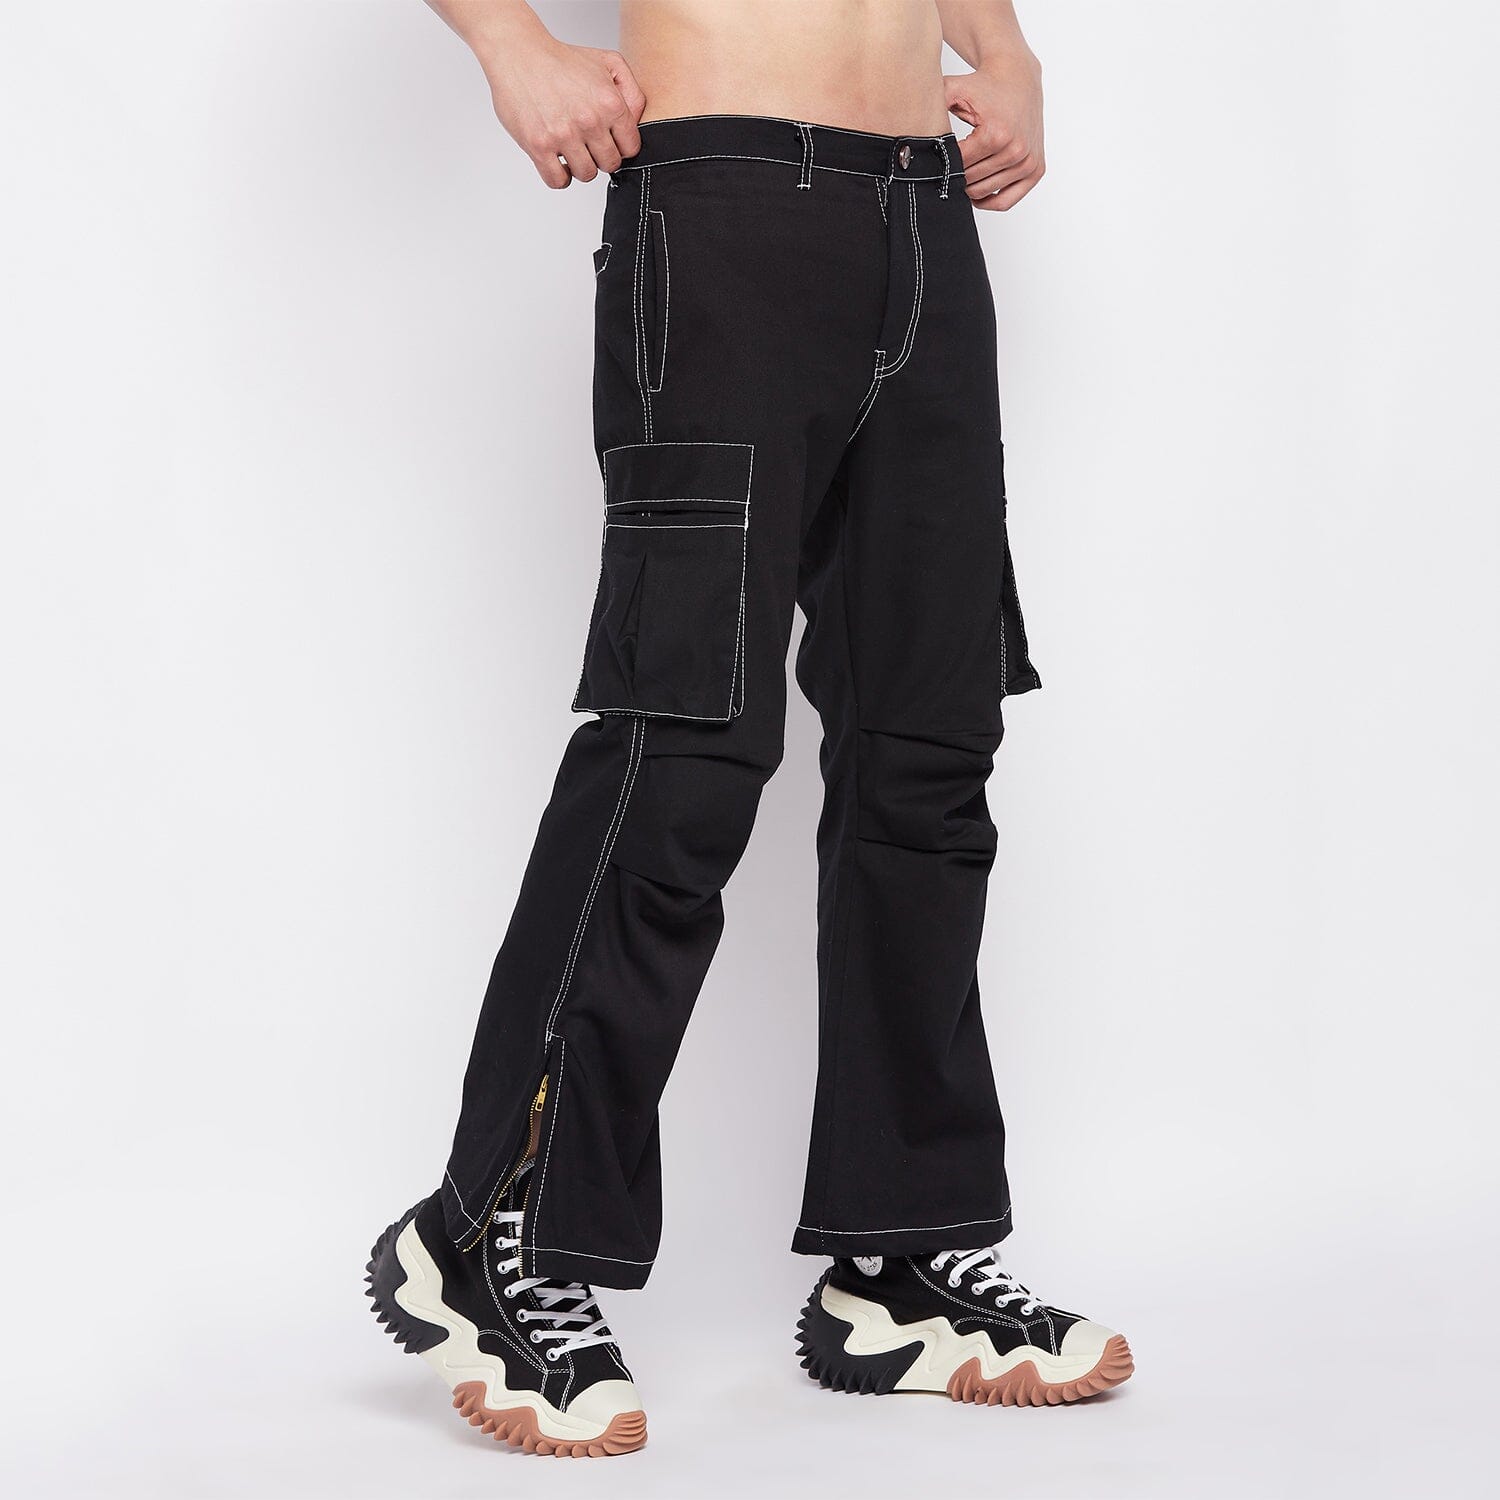 2023 Pocket Stitched High Waist Cargo Jeans Black S in Jeans Online Store |  AnotherChill.com | Cargo jeans, Clothes, Cargo pants outfit